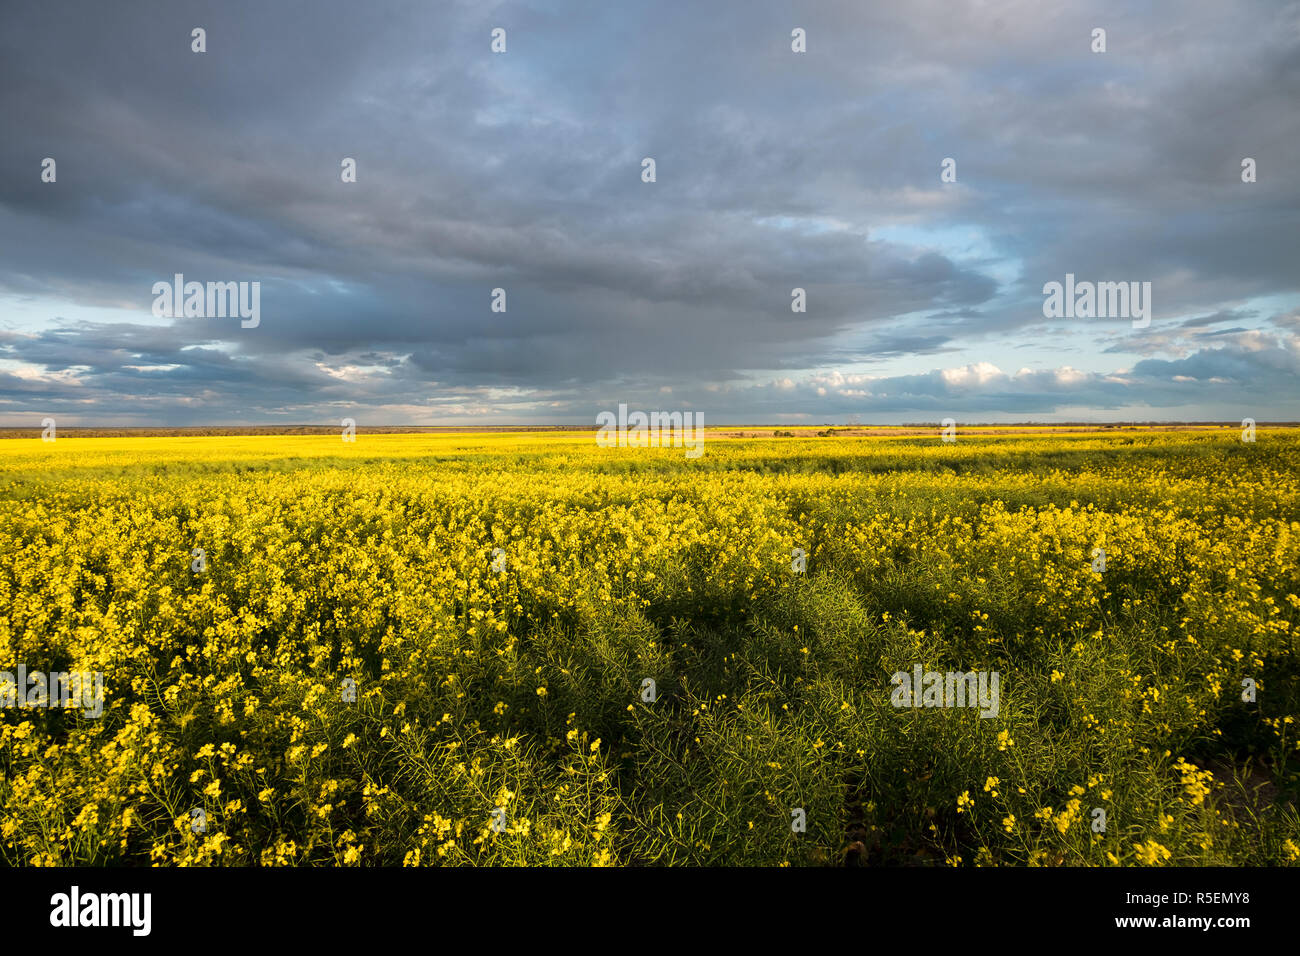 A stunning field of rapeseed plants in bloom as the sun is setting, North of Esperance in Western Australia. Stock Photo